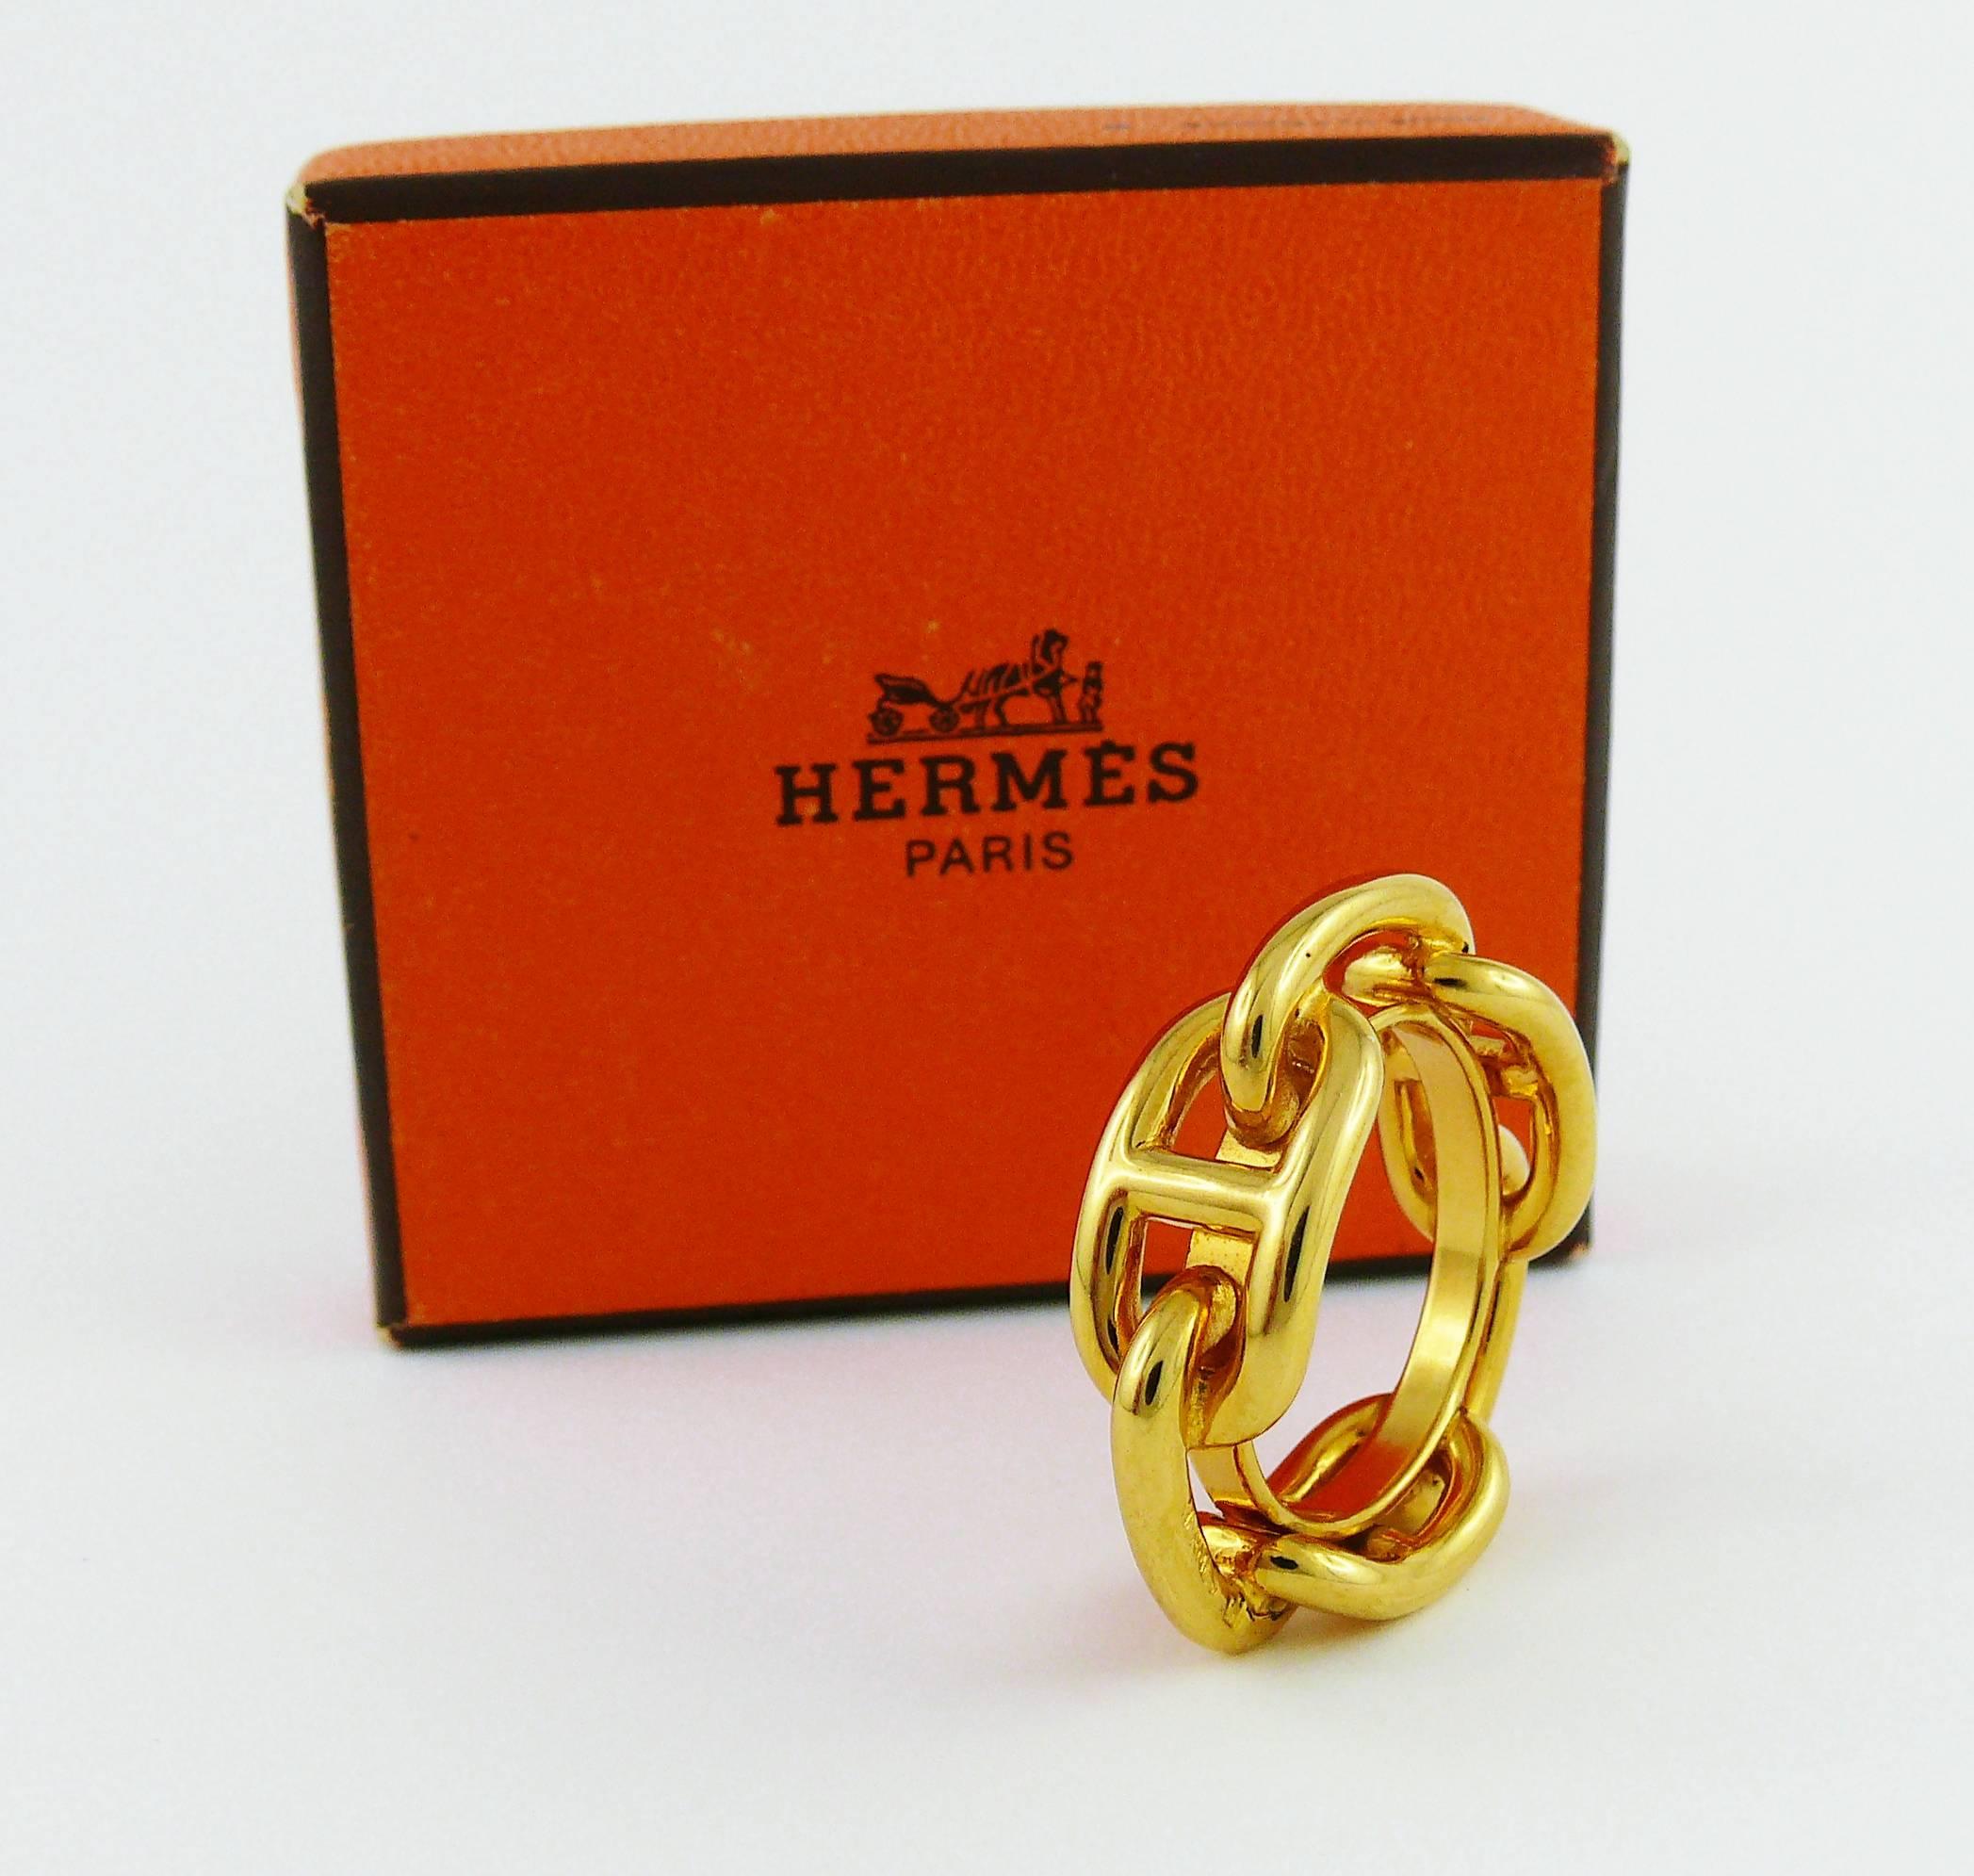 HERMES gold toned Chaine d'Ancre scarf ring.

Embossed HERMES.

Indicative measurements : total diameter approx. 2.9 cm (1.14 inches) / inside circumference approx. 6.30 cm (2.48 inches).

Comes with original box.

JEWELRY CONDITION CHART
-